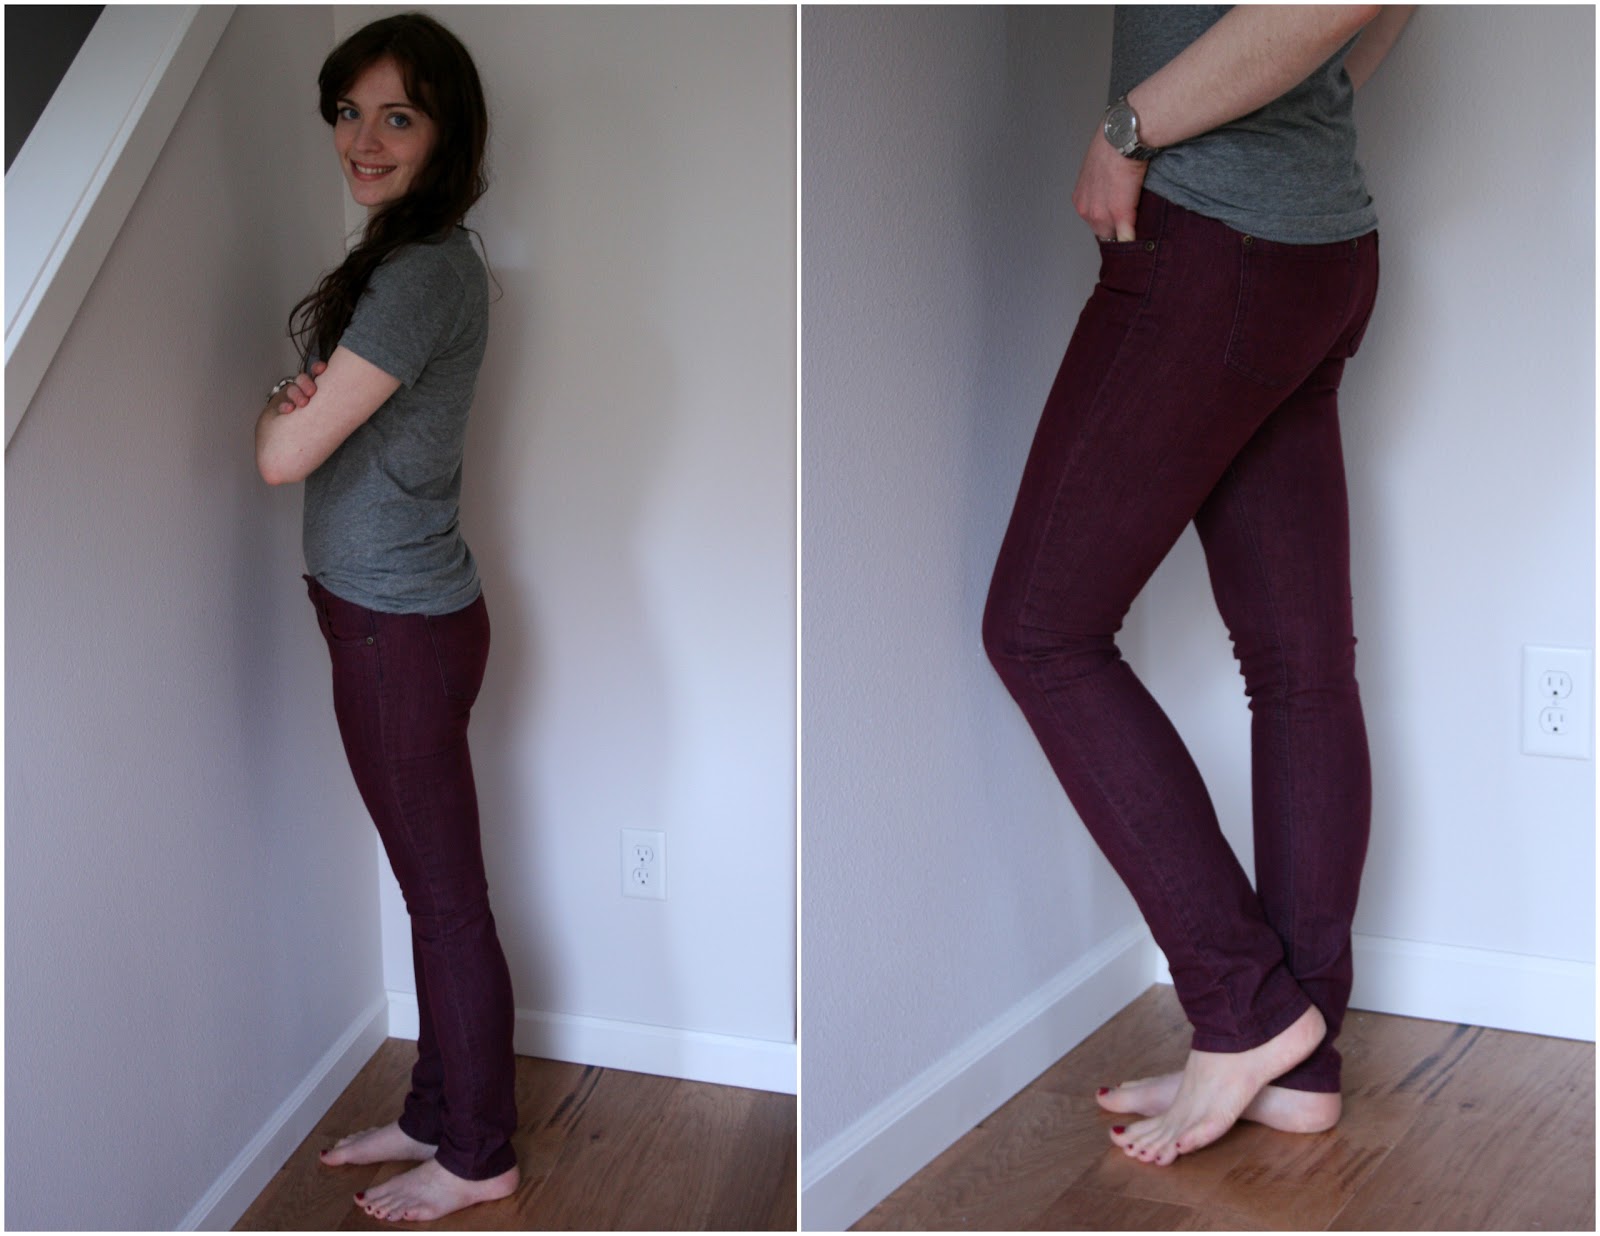 Totally successful: Burgundy dyed jeans project / Create / Enjoy